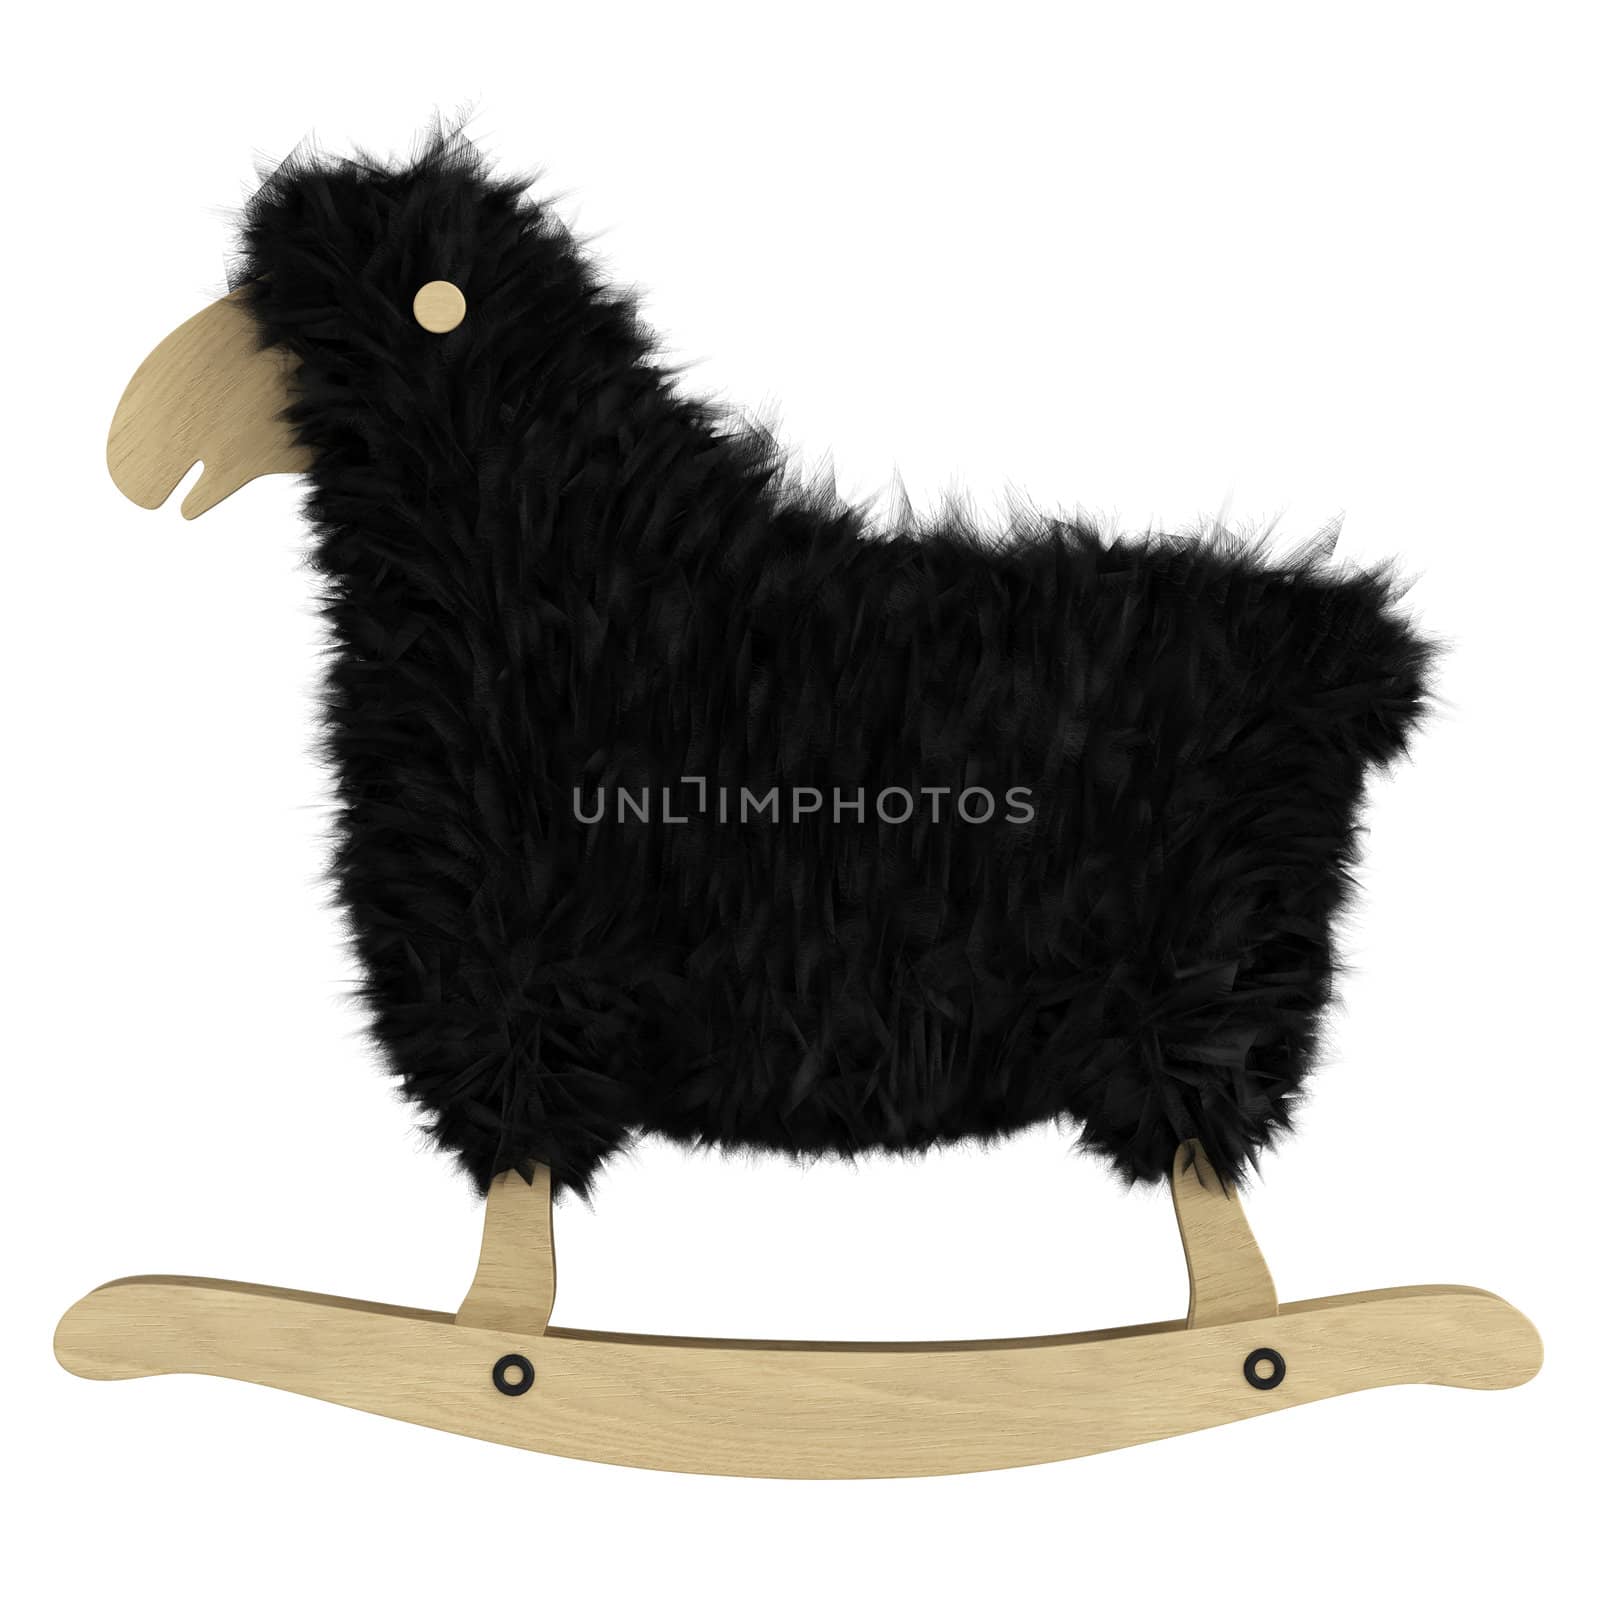 Cute wooden toy on rockers in the shape of a woolly sheep with black fleece isolated on a white background